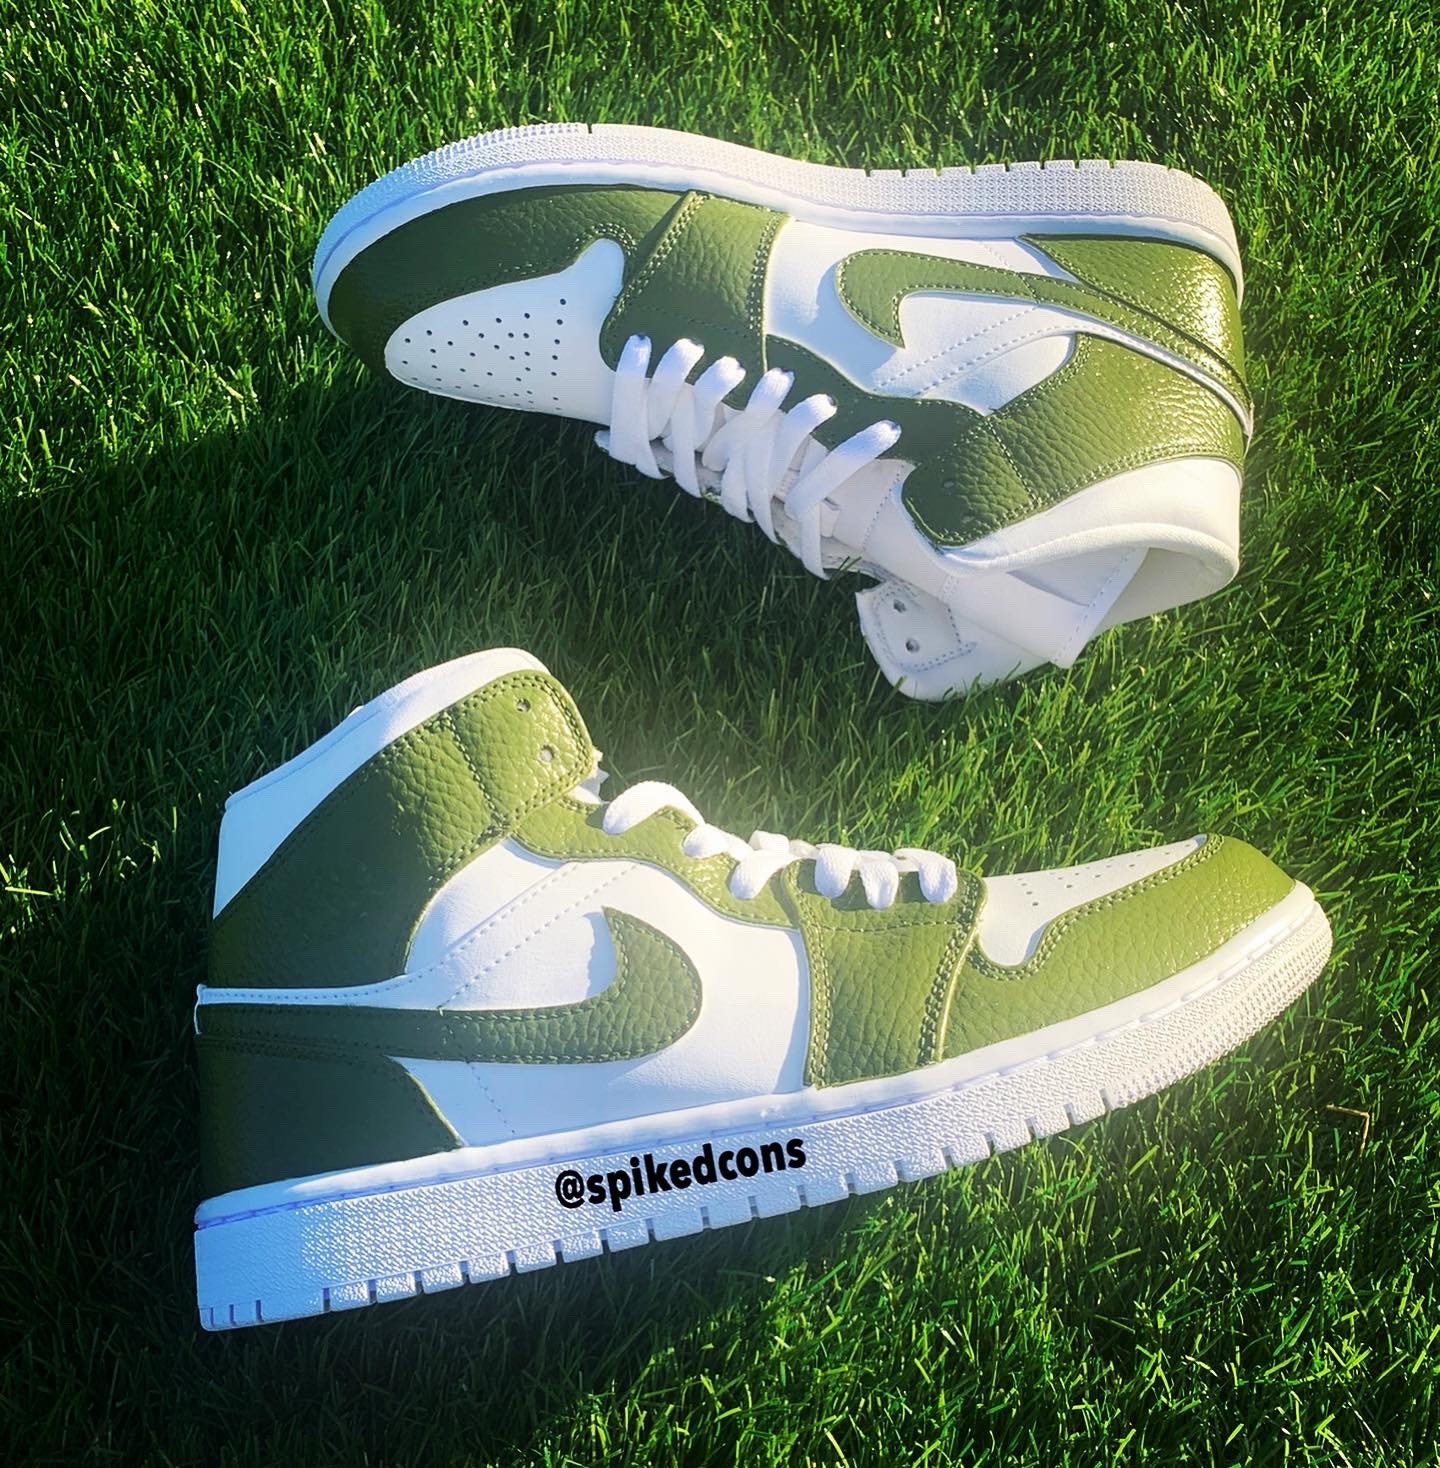 pine green off white af1 mid sizing｜TikTok Search